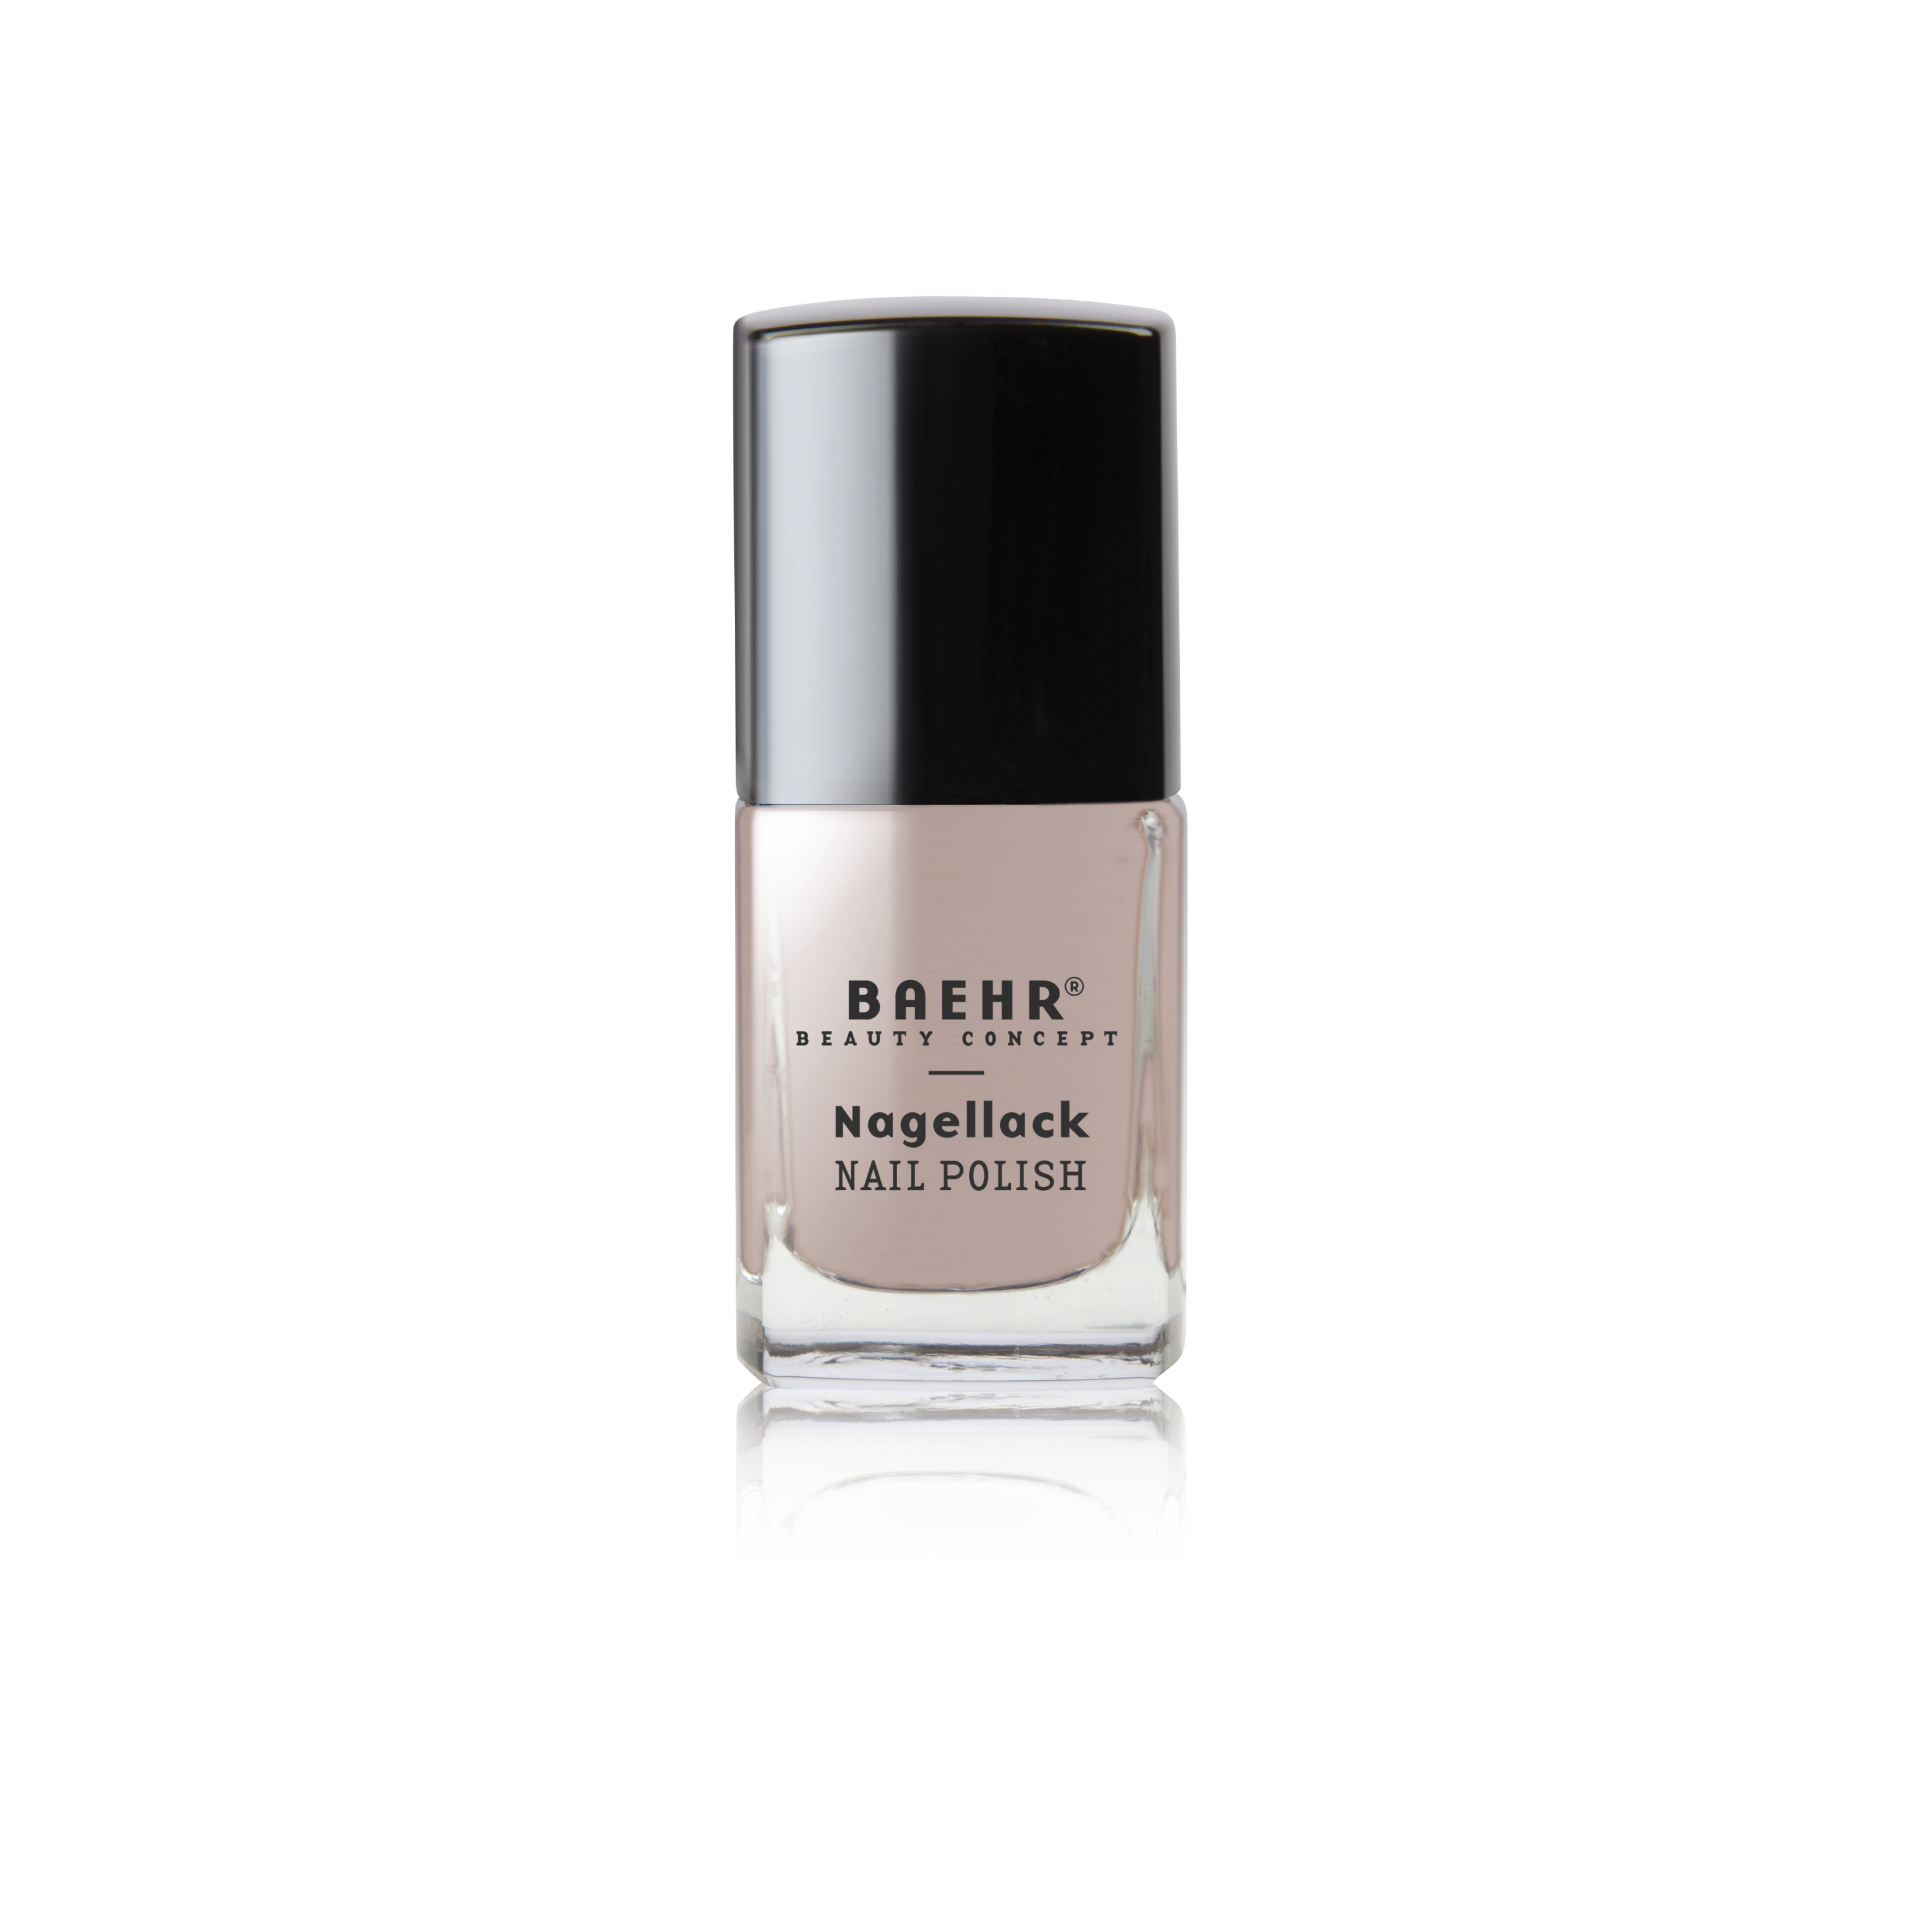 BAEHR BEAUTY CONCEPT - NAILS Nagellack nude soft pastell 11 ml